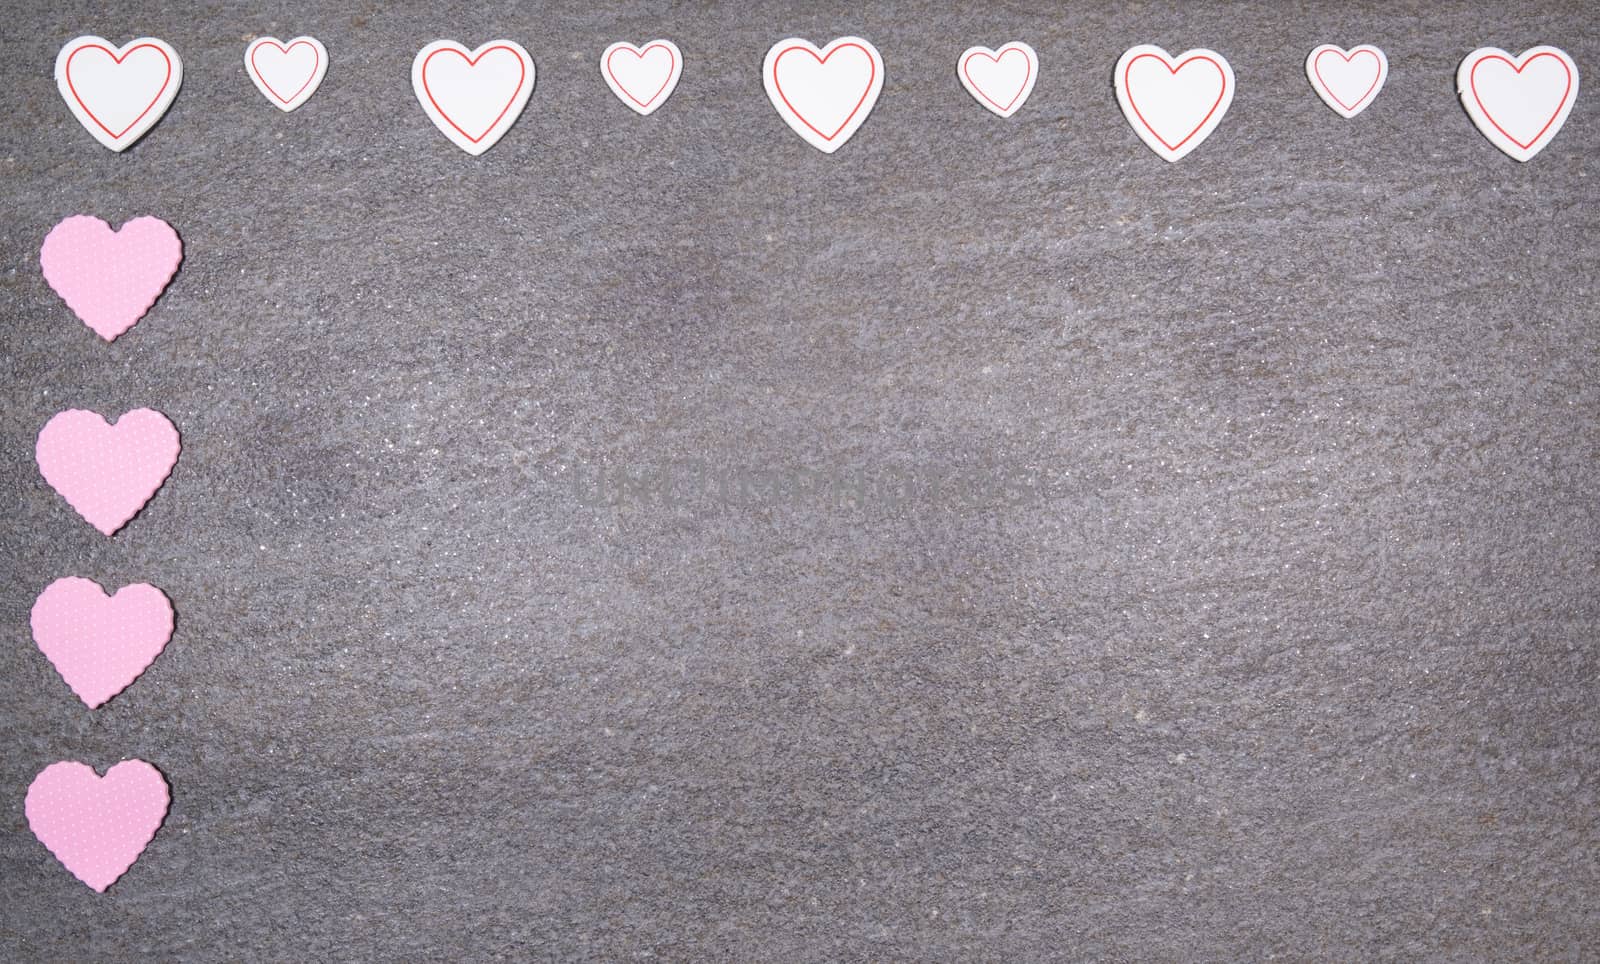 gray granite background with pink and white hearts for valentines day. Valentine's day and love concept.